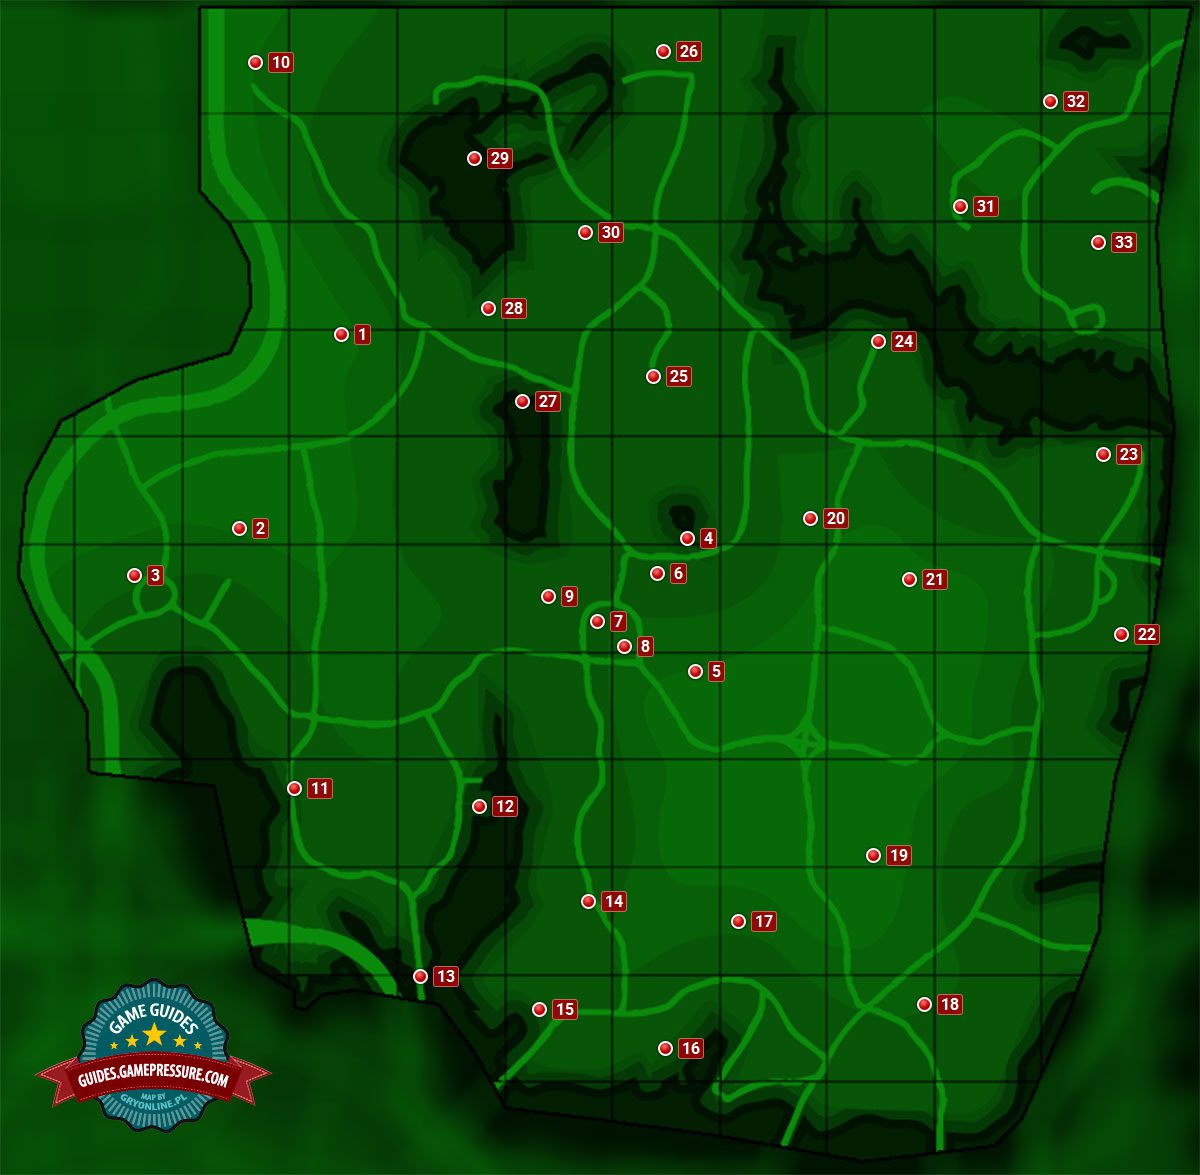 All magazine locations in fallout 4 фото 91